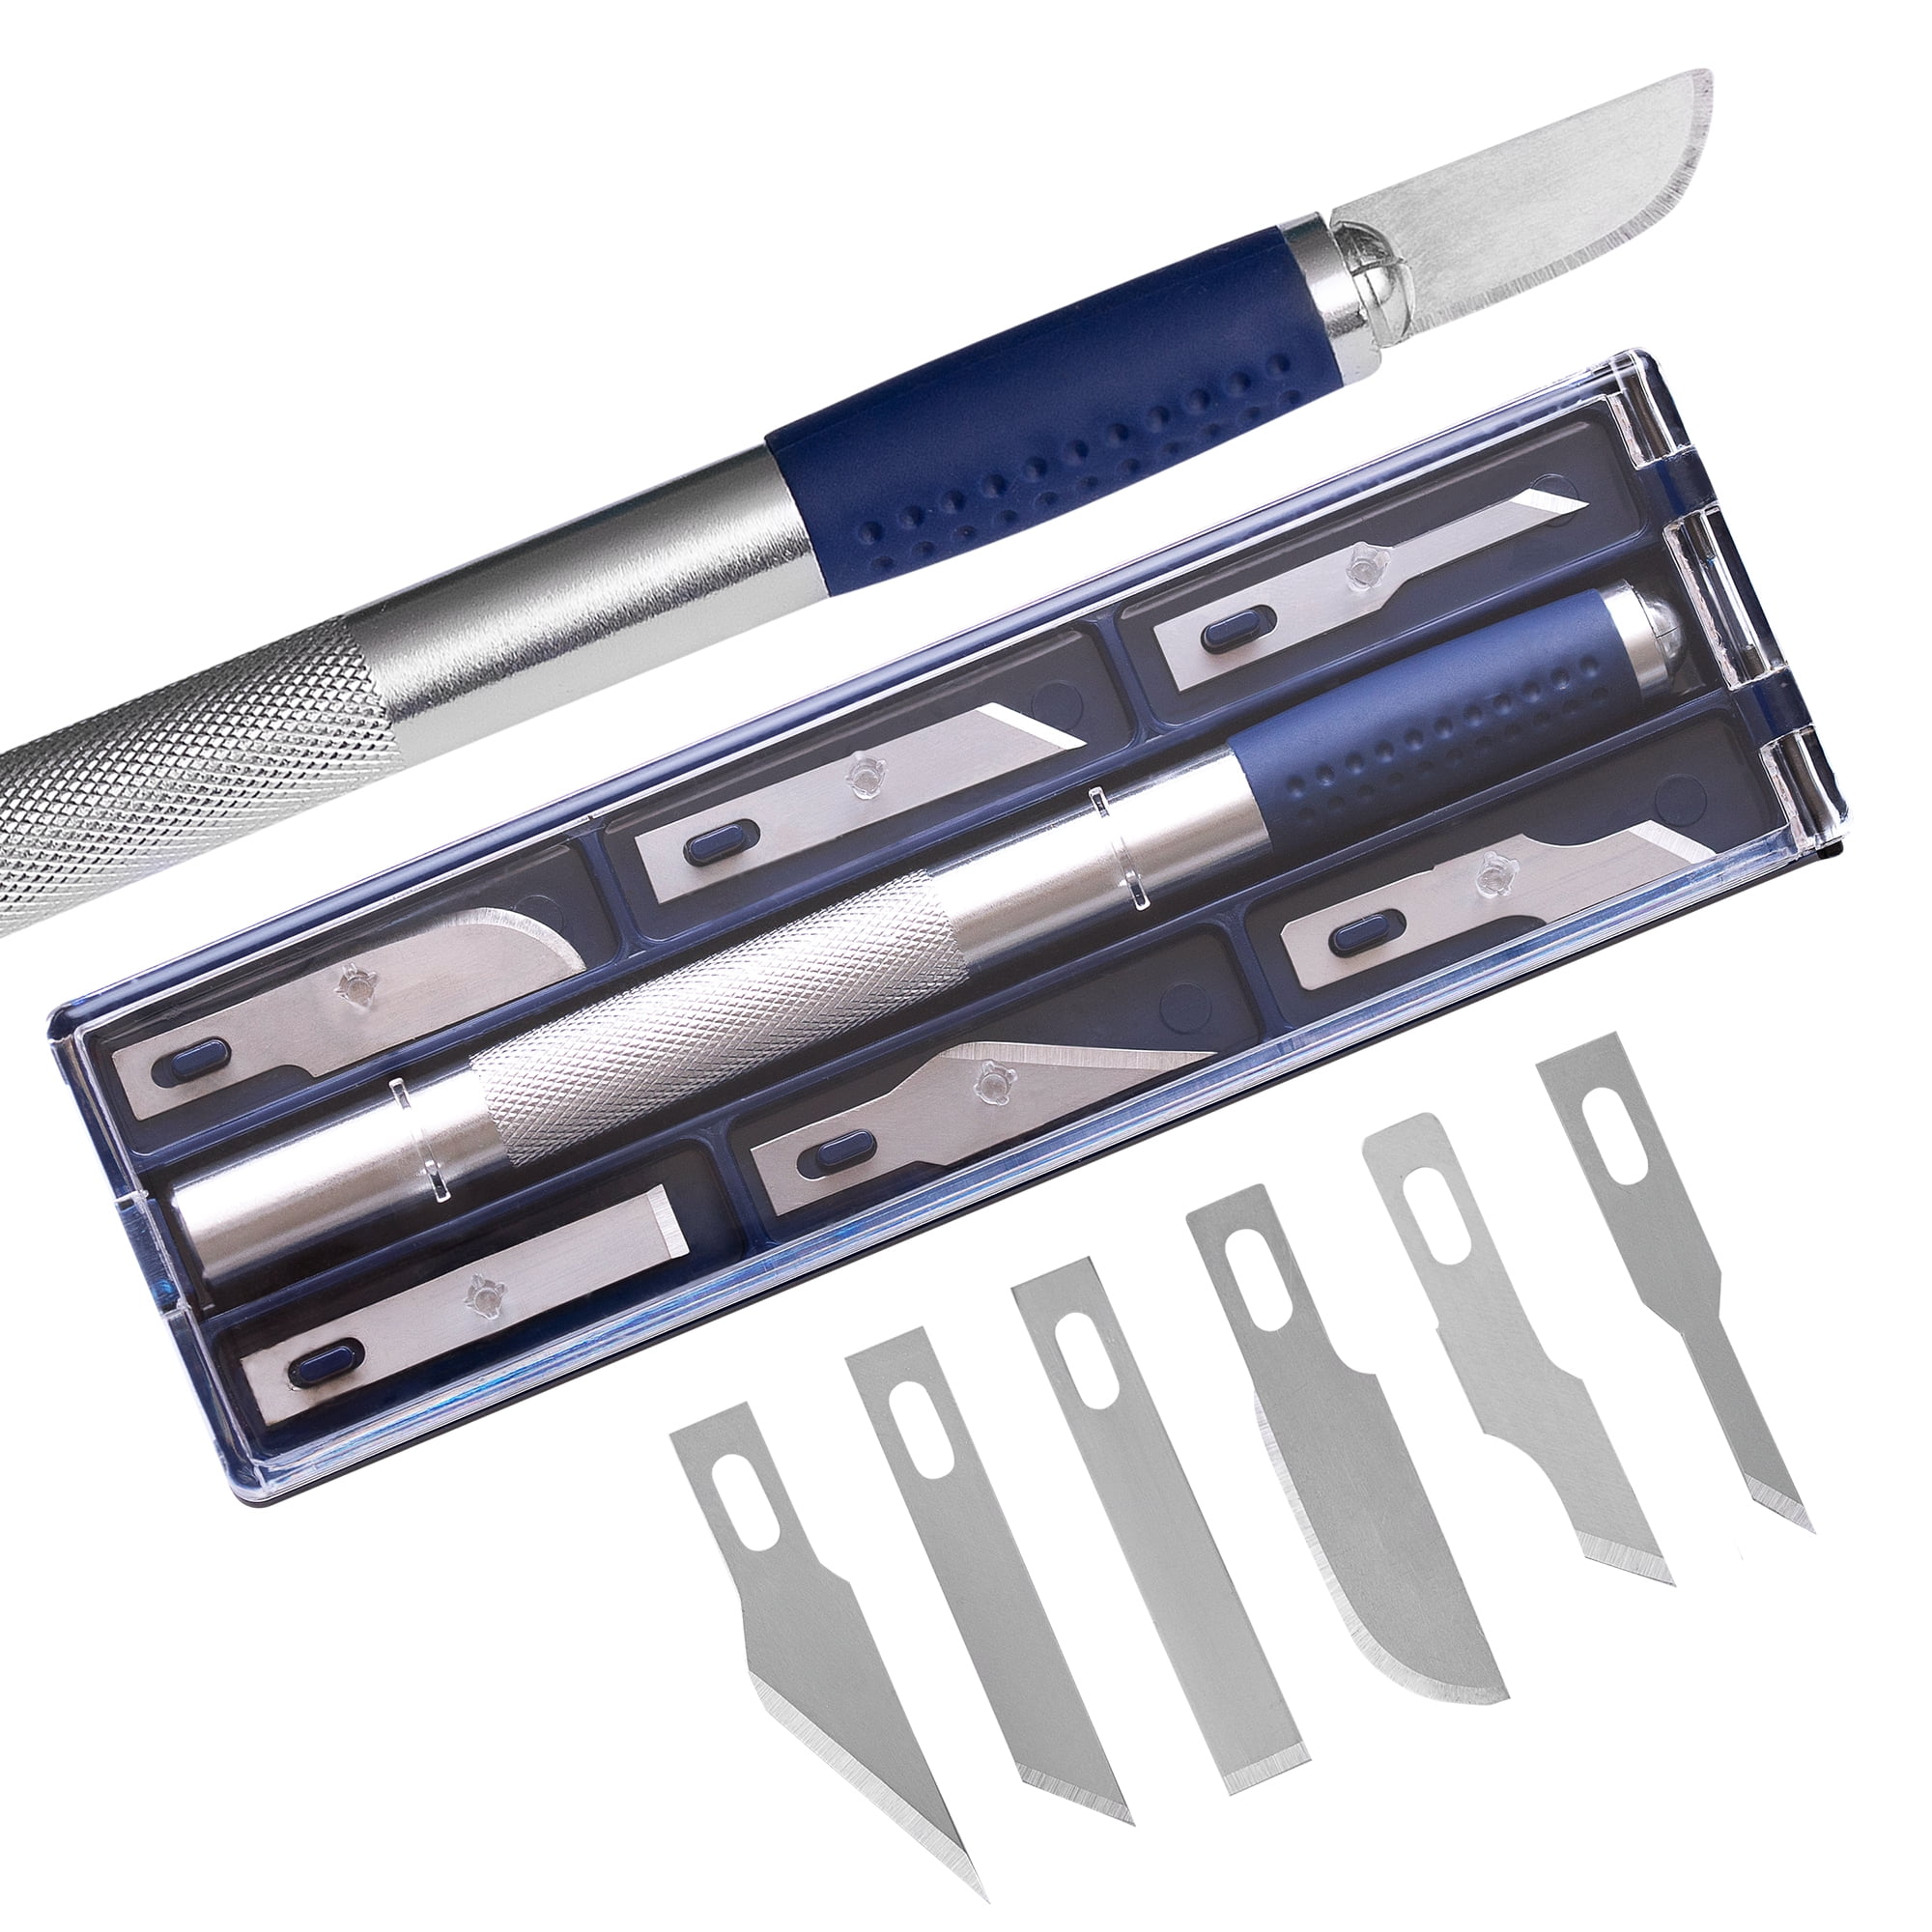 Craft Carving Knife Hobby Knife with 5 Spare Blades, Aluminum